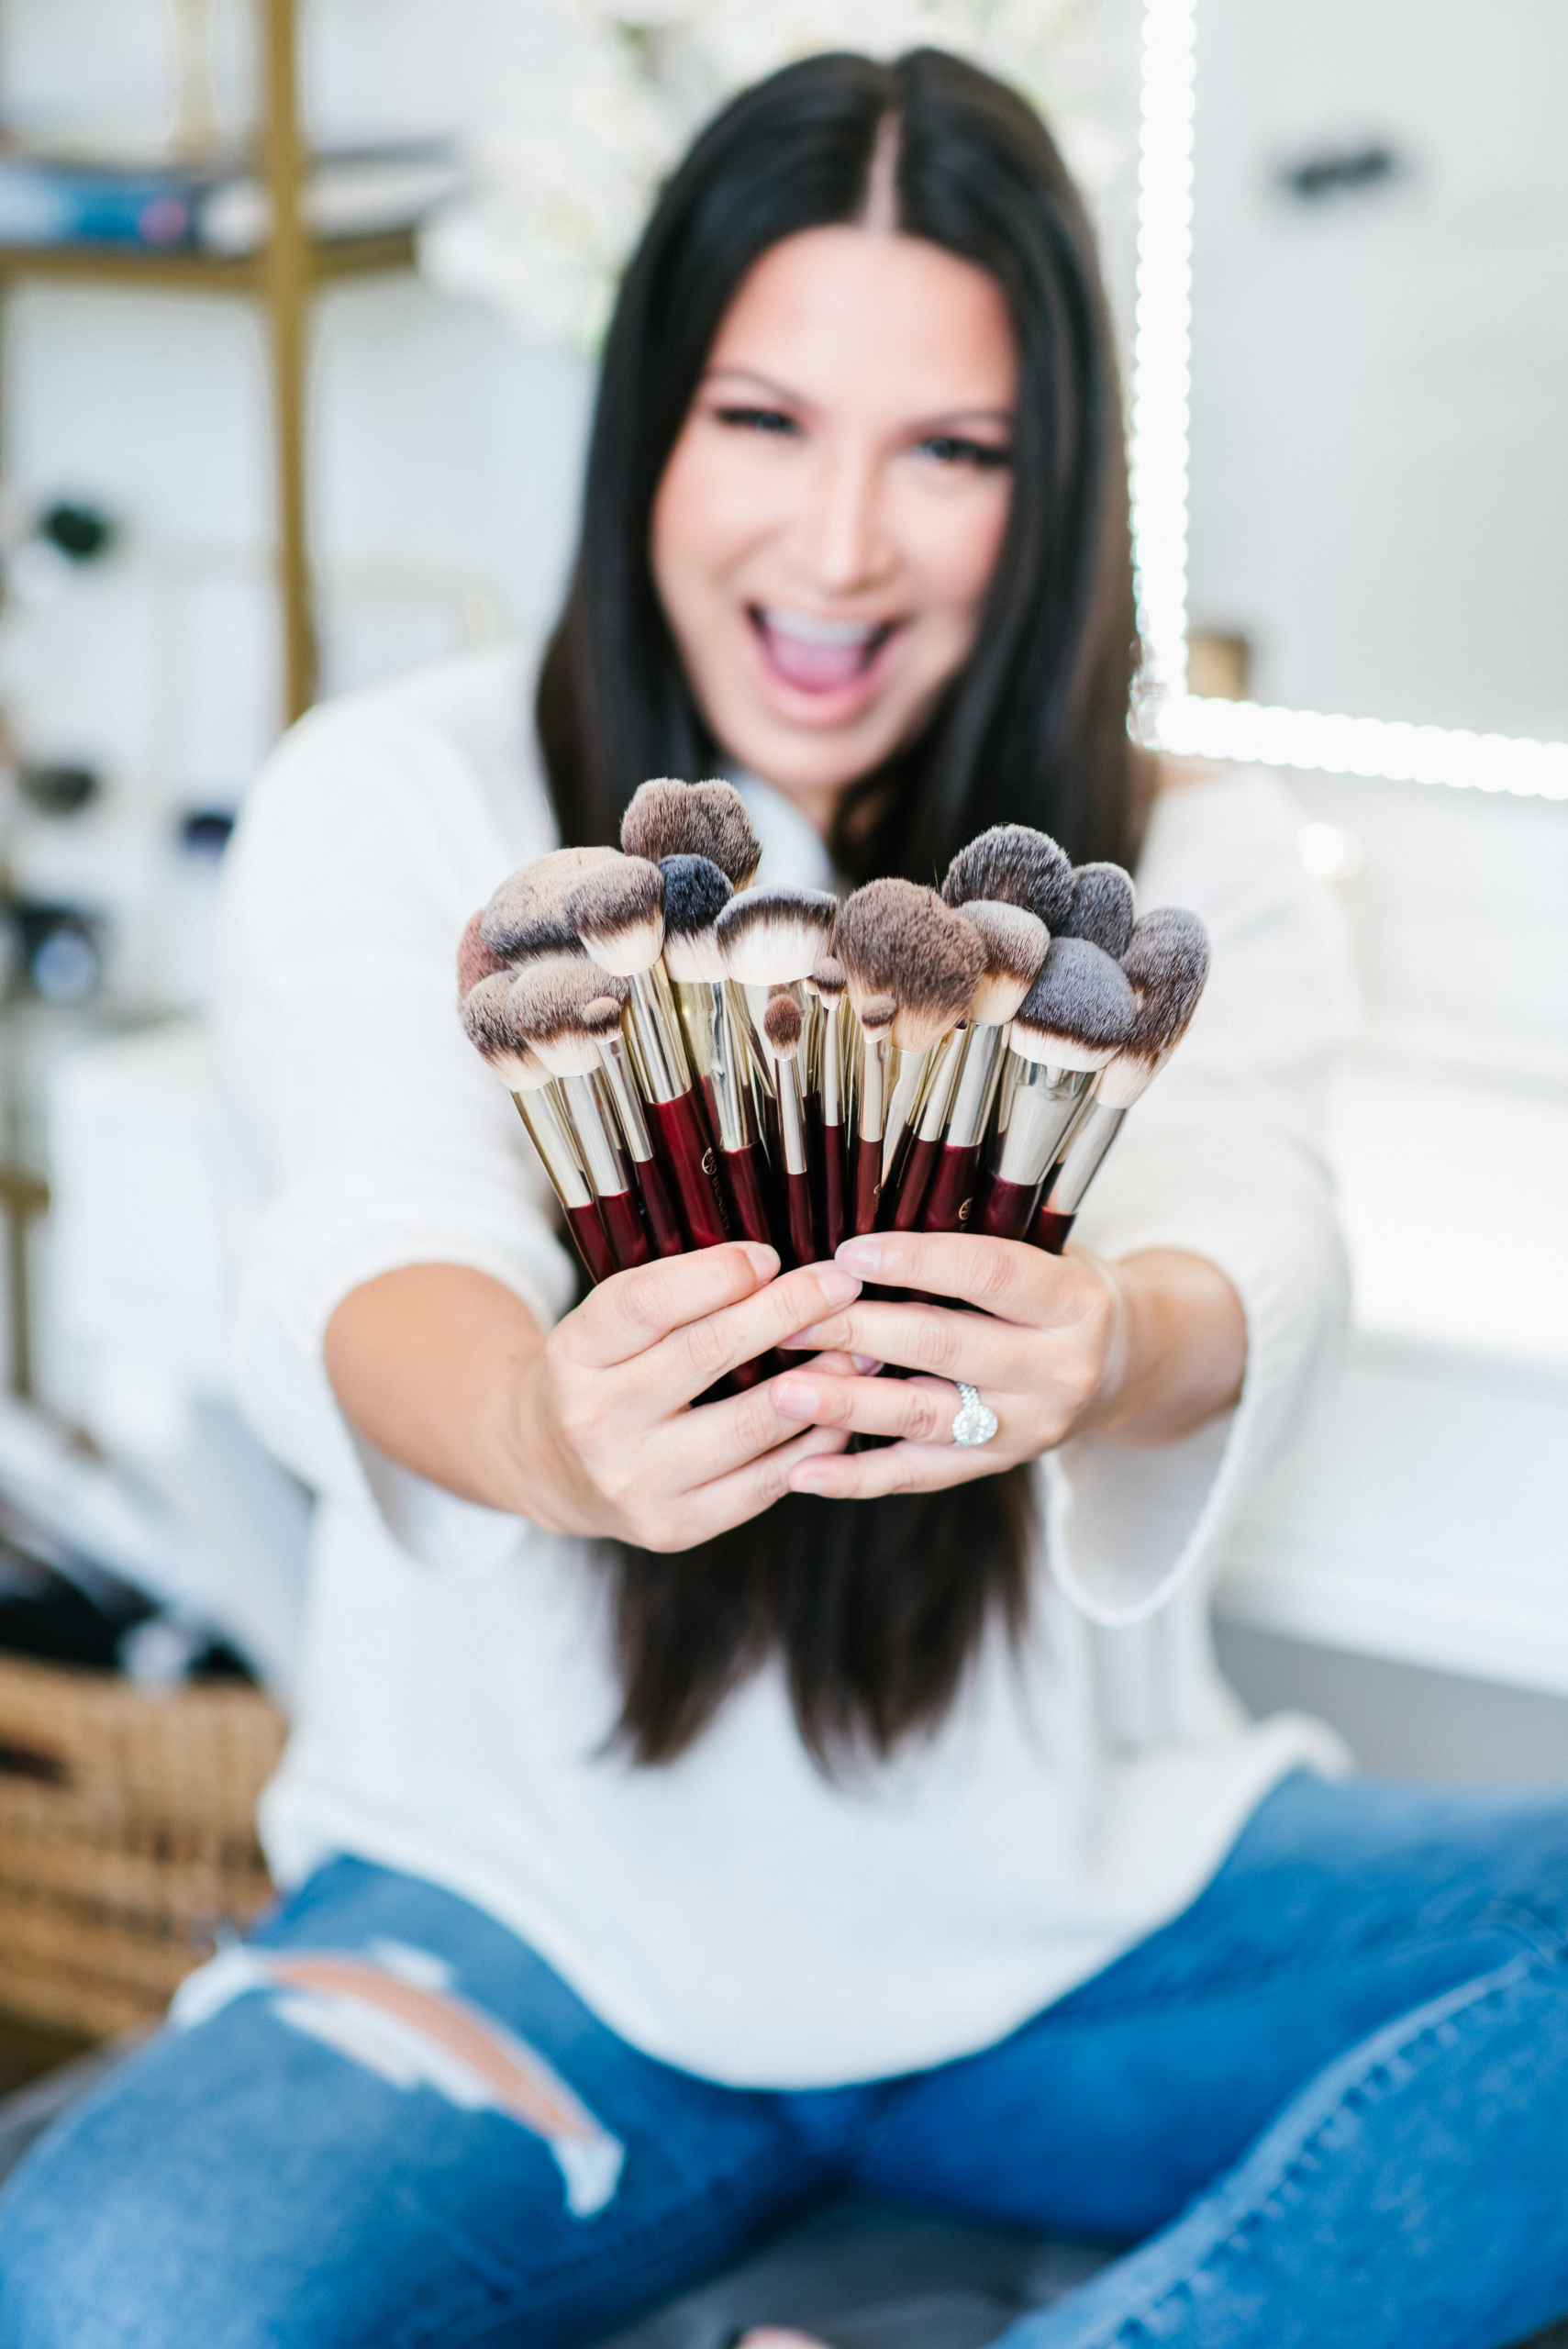 bk beauty brushes review